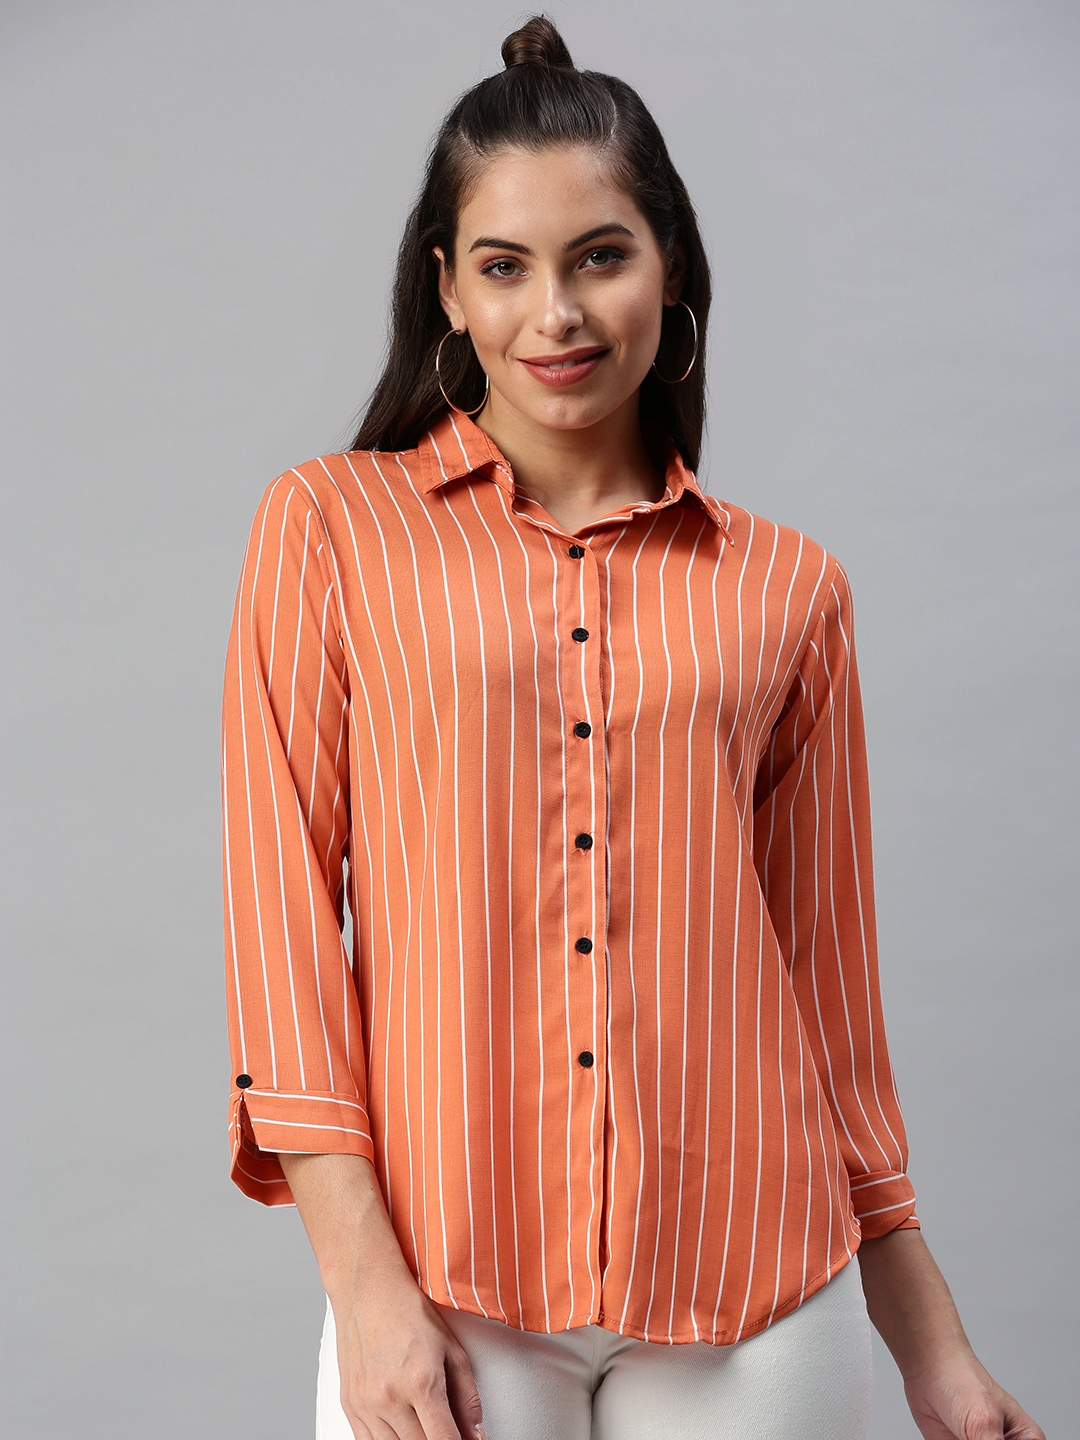 Women's Orange Polyester Striped Casual Shirts